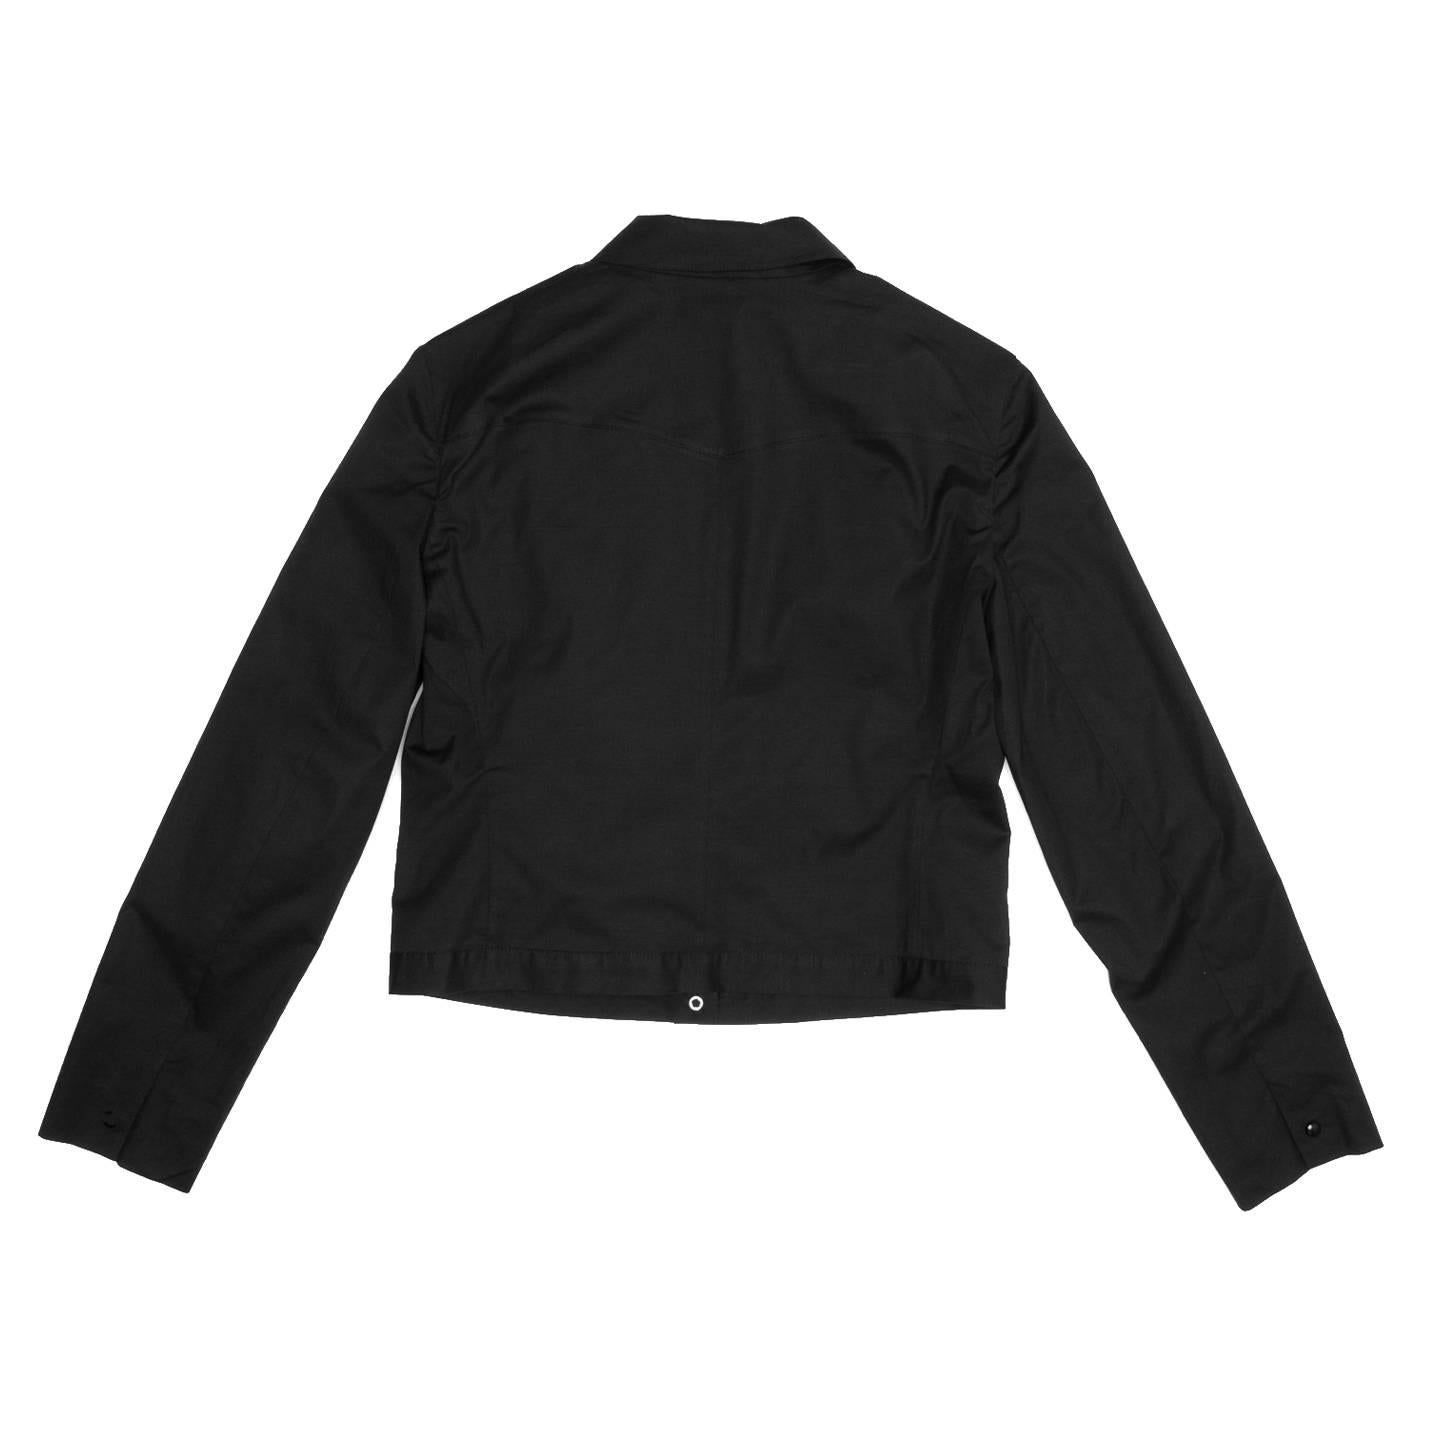 Miu Miu Black Cotton Snap Jacket In New Condition For Sale In Brooklyn, NY